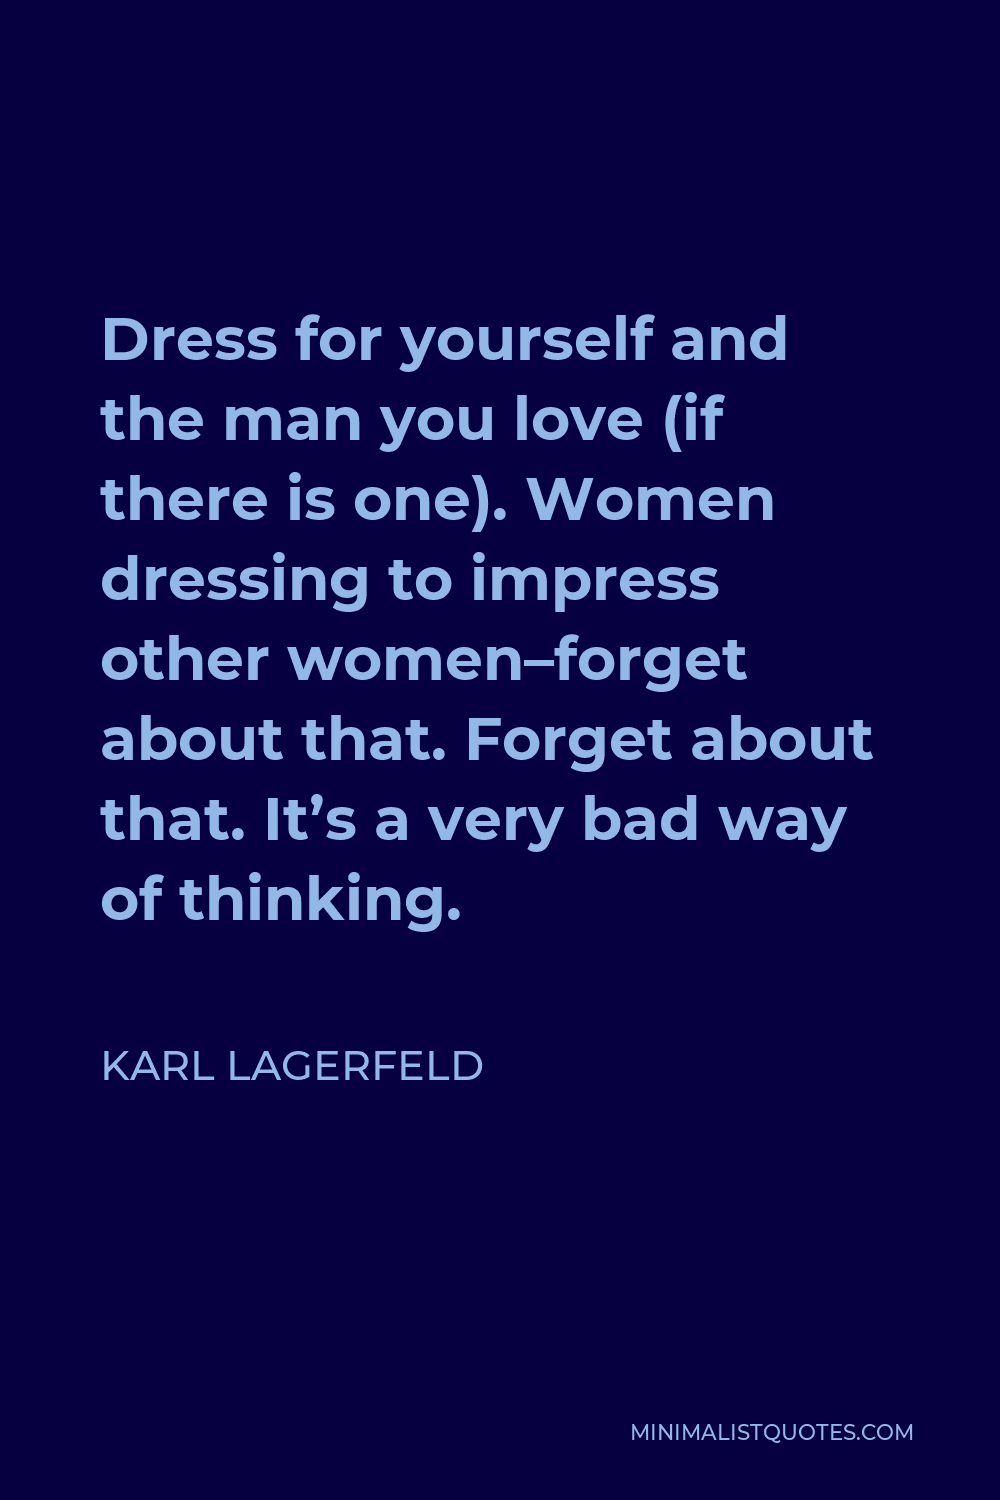 Karl Lagerfeld Quote - Dress for yourself and the man you love (if there is one). Women dressing to impress other women–forget about that. Forget about that. It’s a very bad way of thinking.